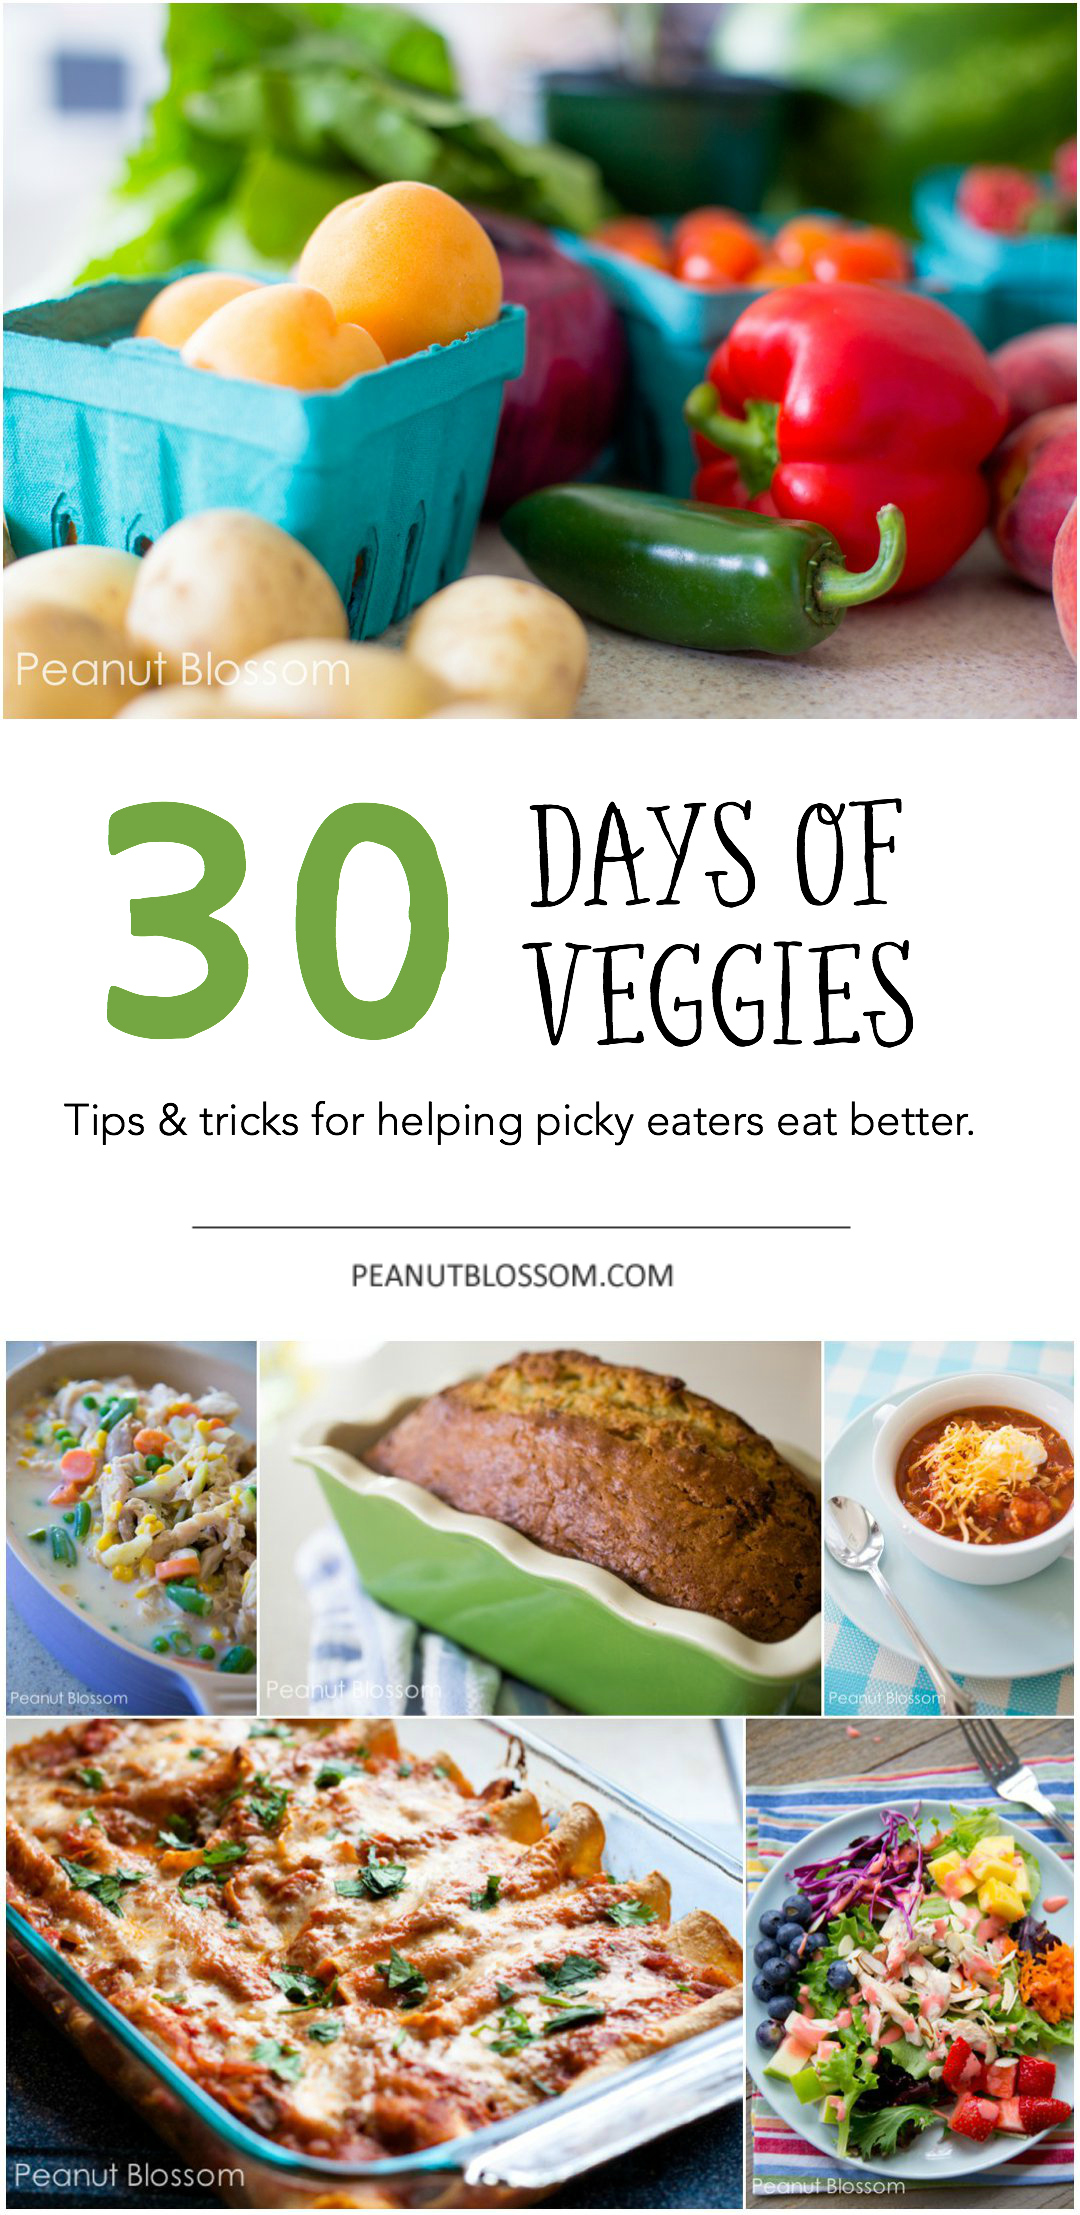 Photo collage shows several kid-friendly recipes that are loaded with vegetables.